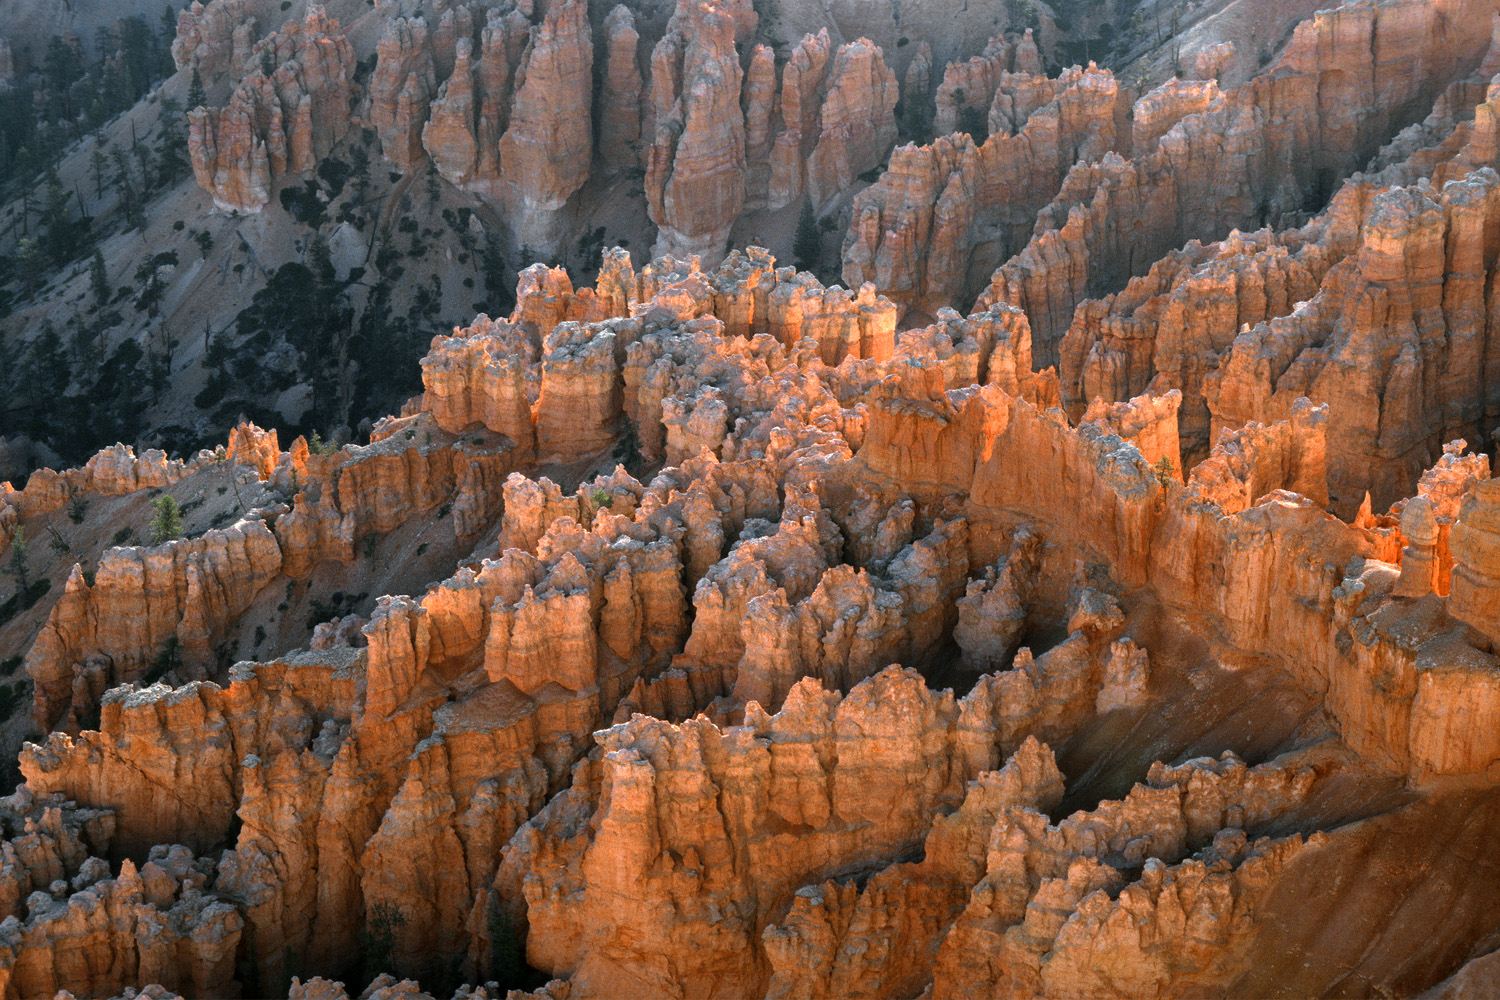 bill-hocker-from-bryce-point-bryce-canyon-national-park-utah-2003